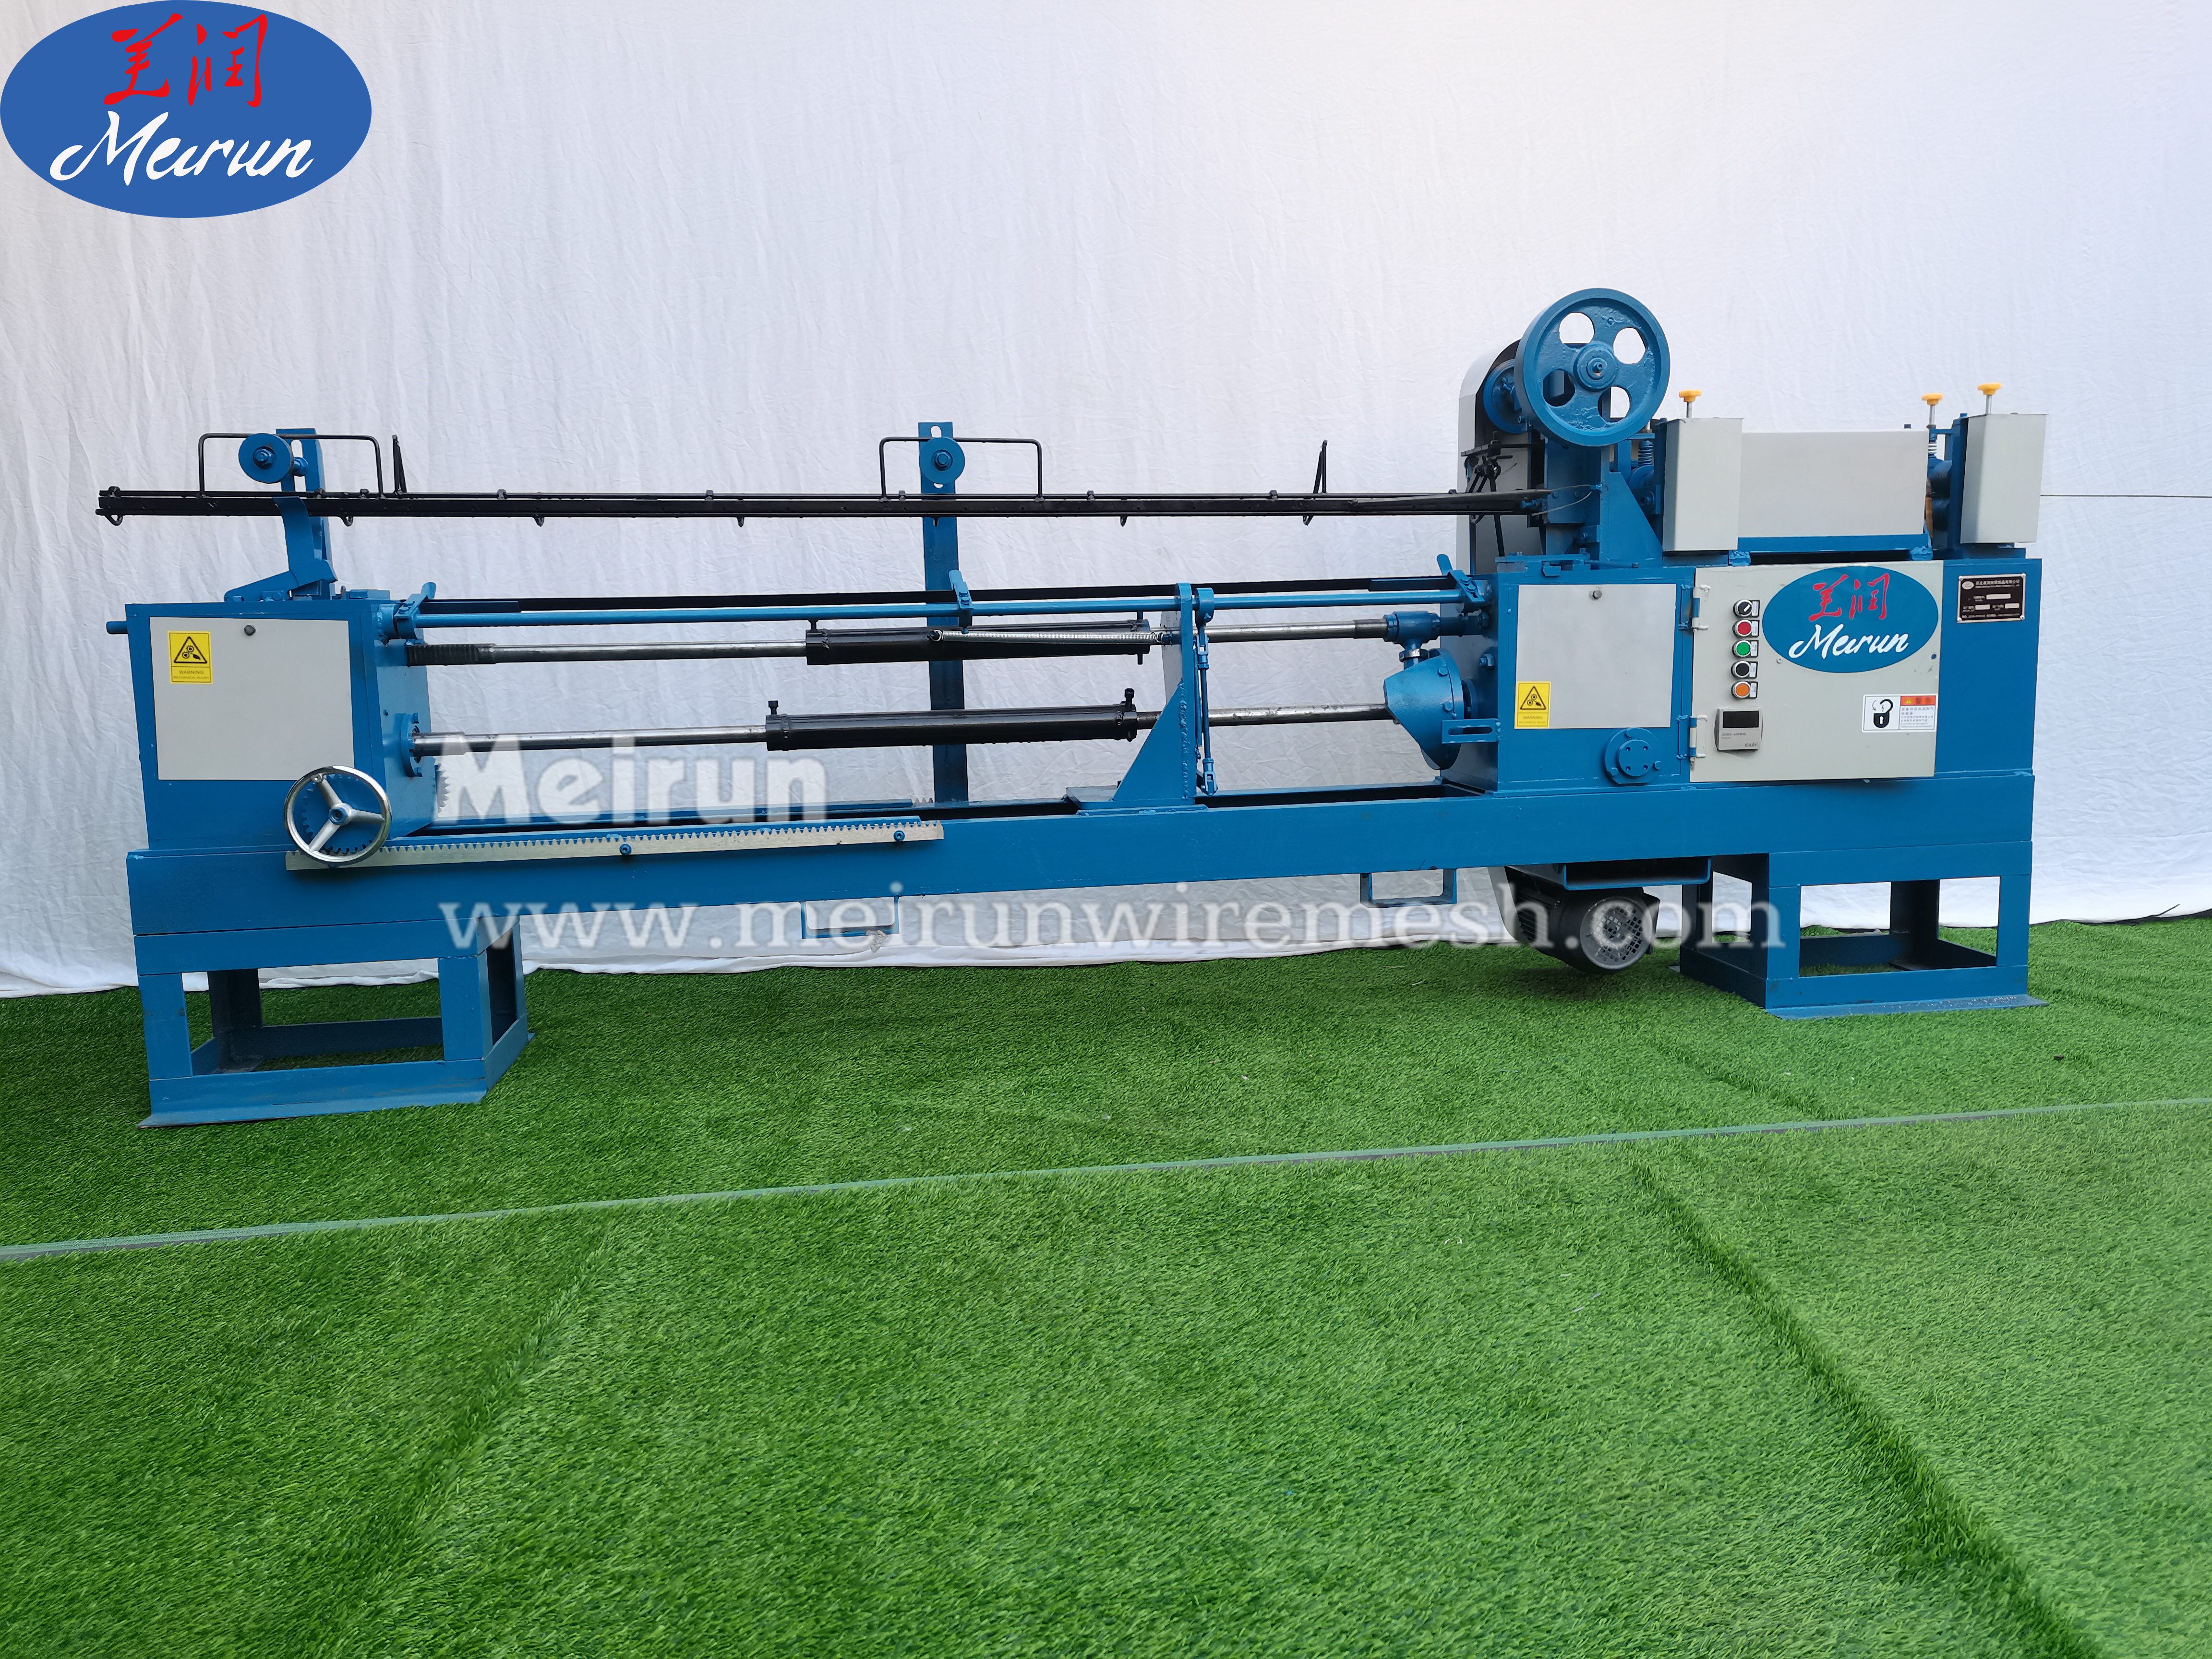 Galvanized Double Loop Bale Ties / Quick Link Cotton Packing Wire/Double Loops/Bale Tie Machine